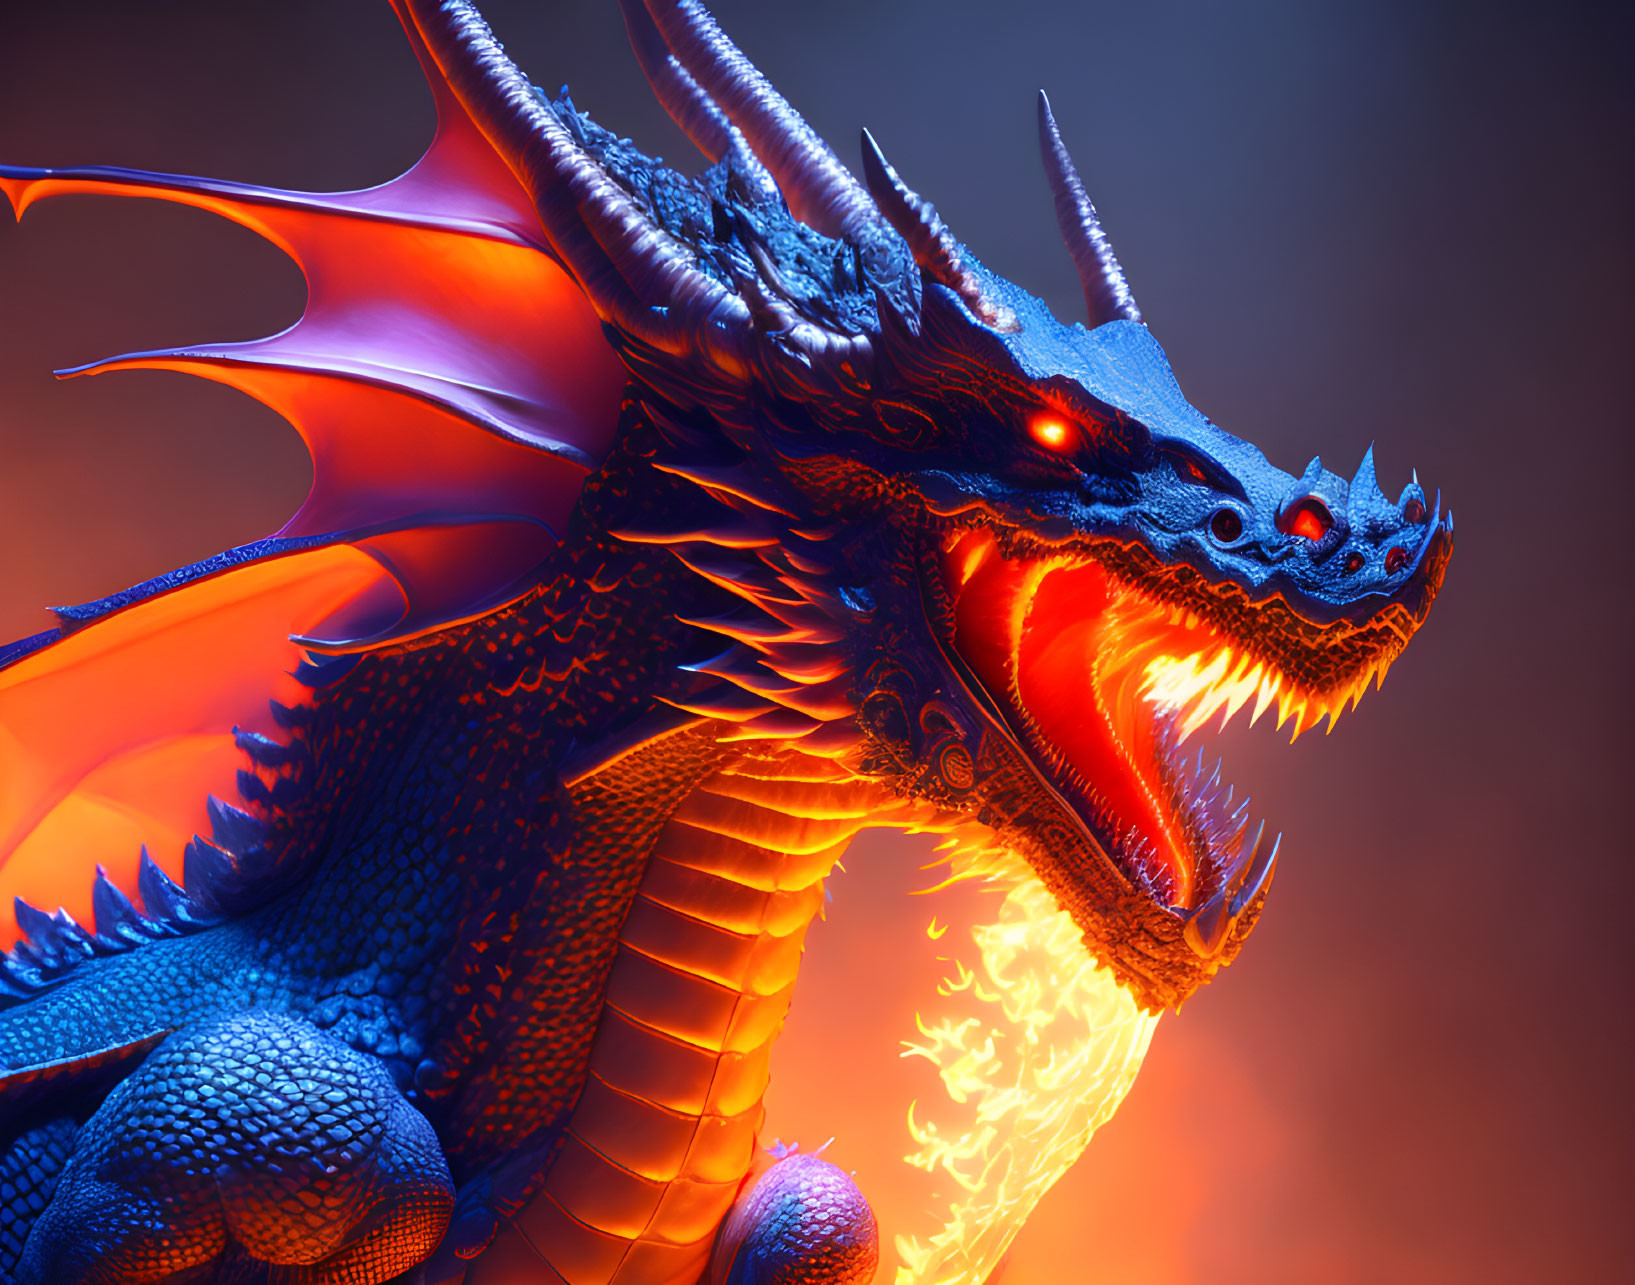 Detailed 3D Rendering of Blue Dragon with Glowing Red Eyes and Flames on Orange Backdrop